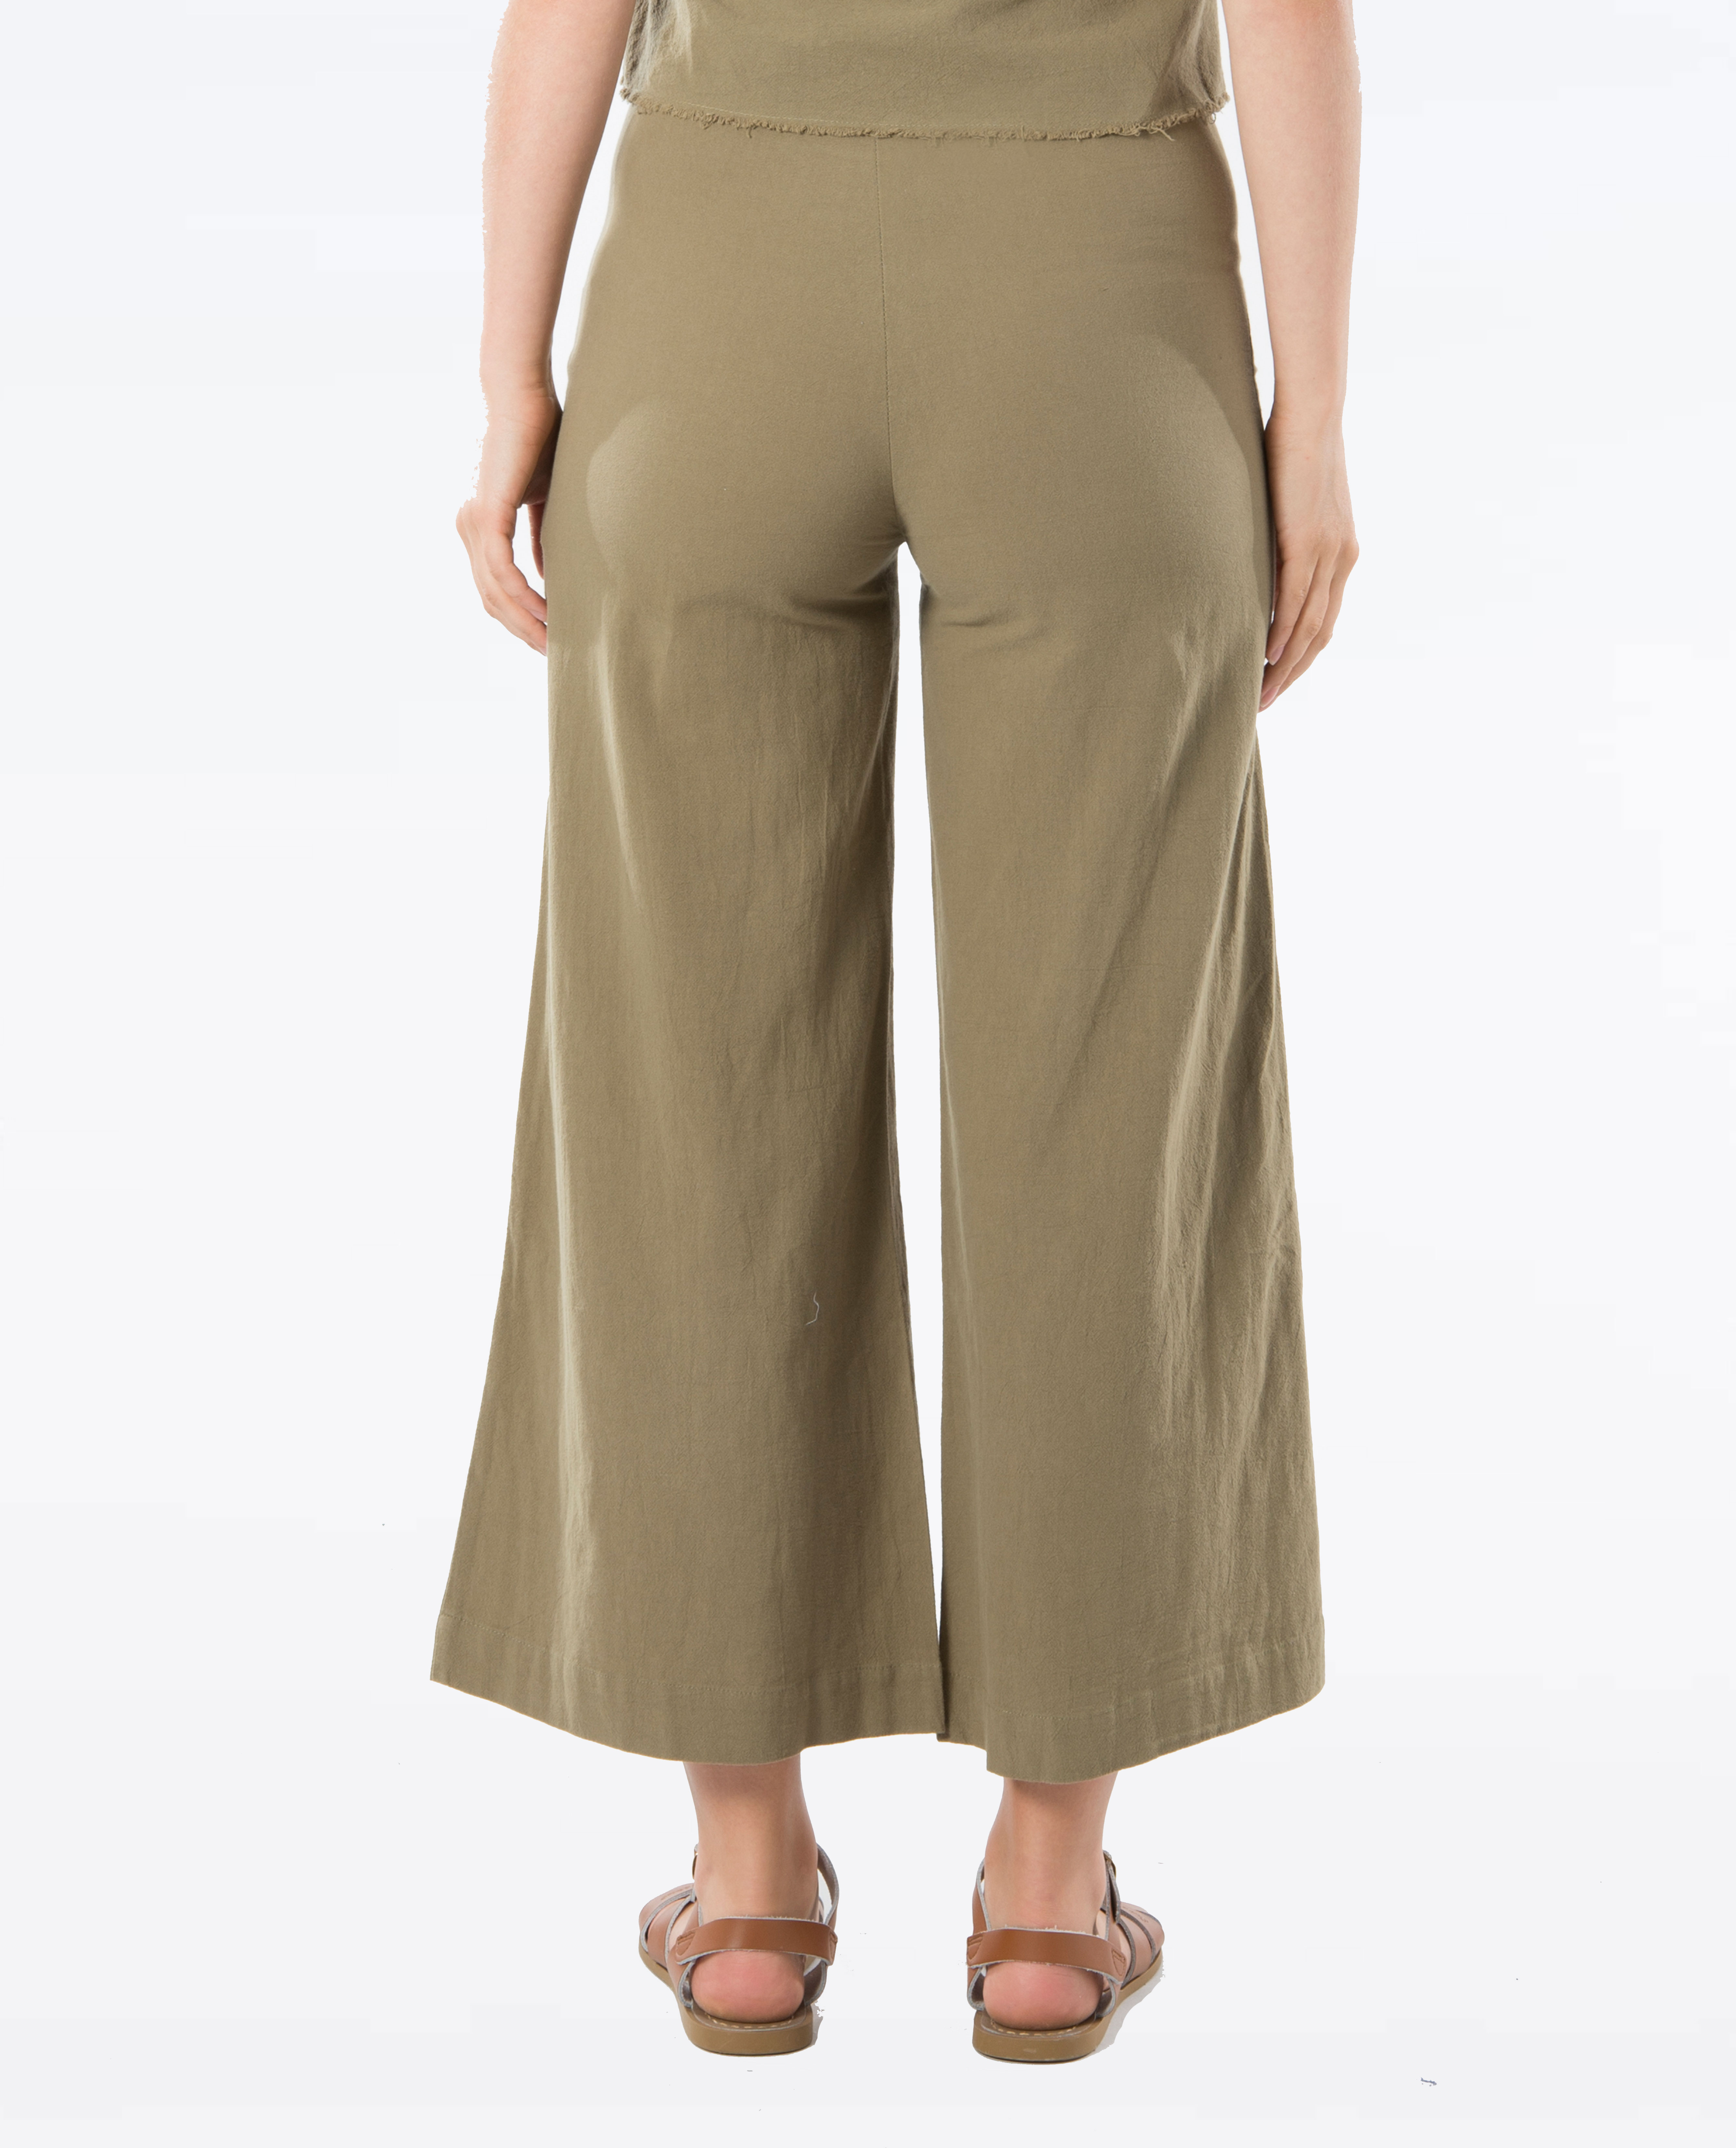 Rusty Just Rouser Flare Crop Pant | Ozmosis | Pants & Jeans